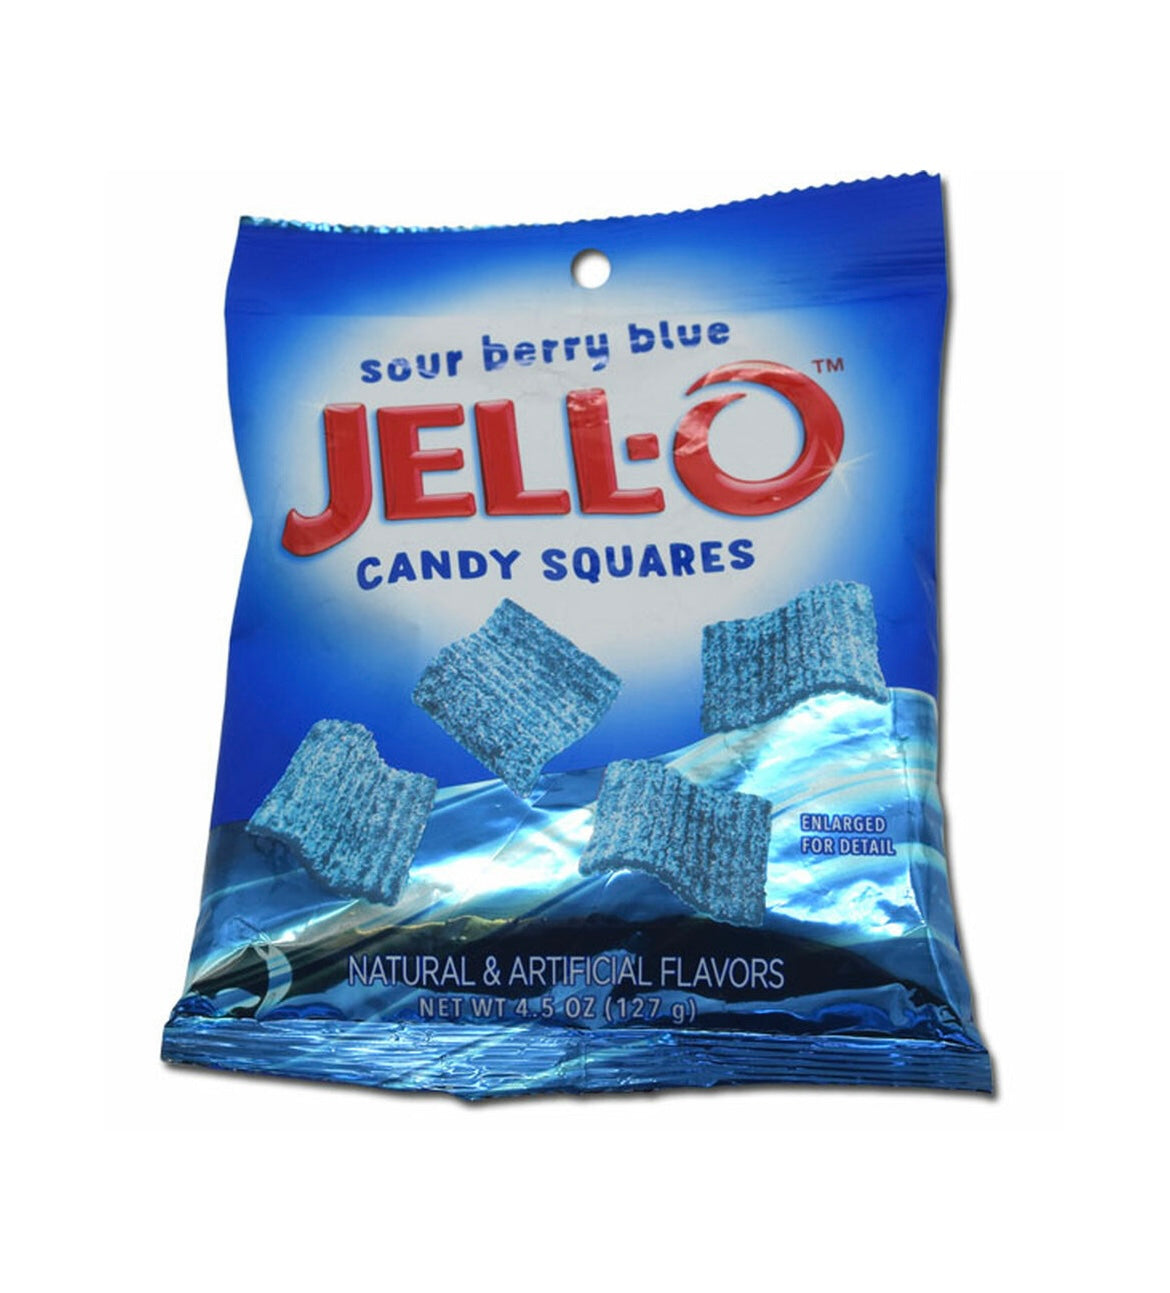 Jell-O candy squares